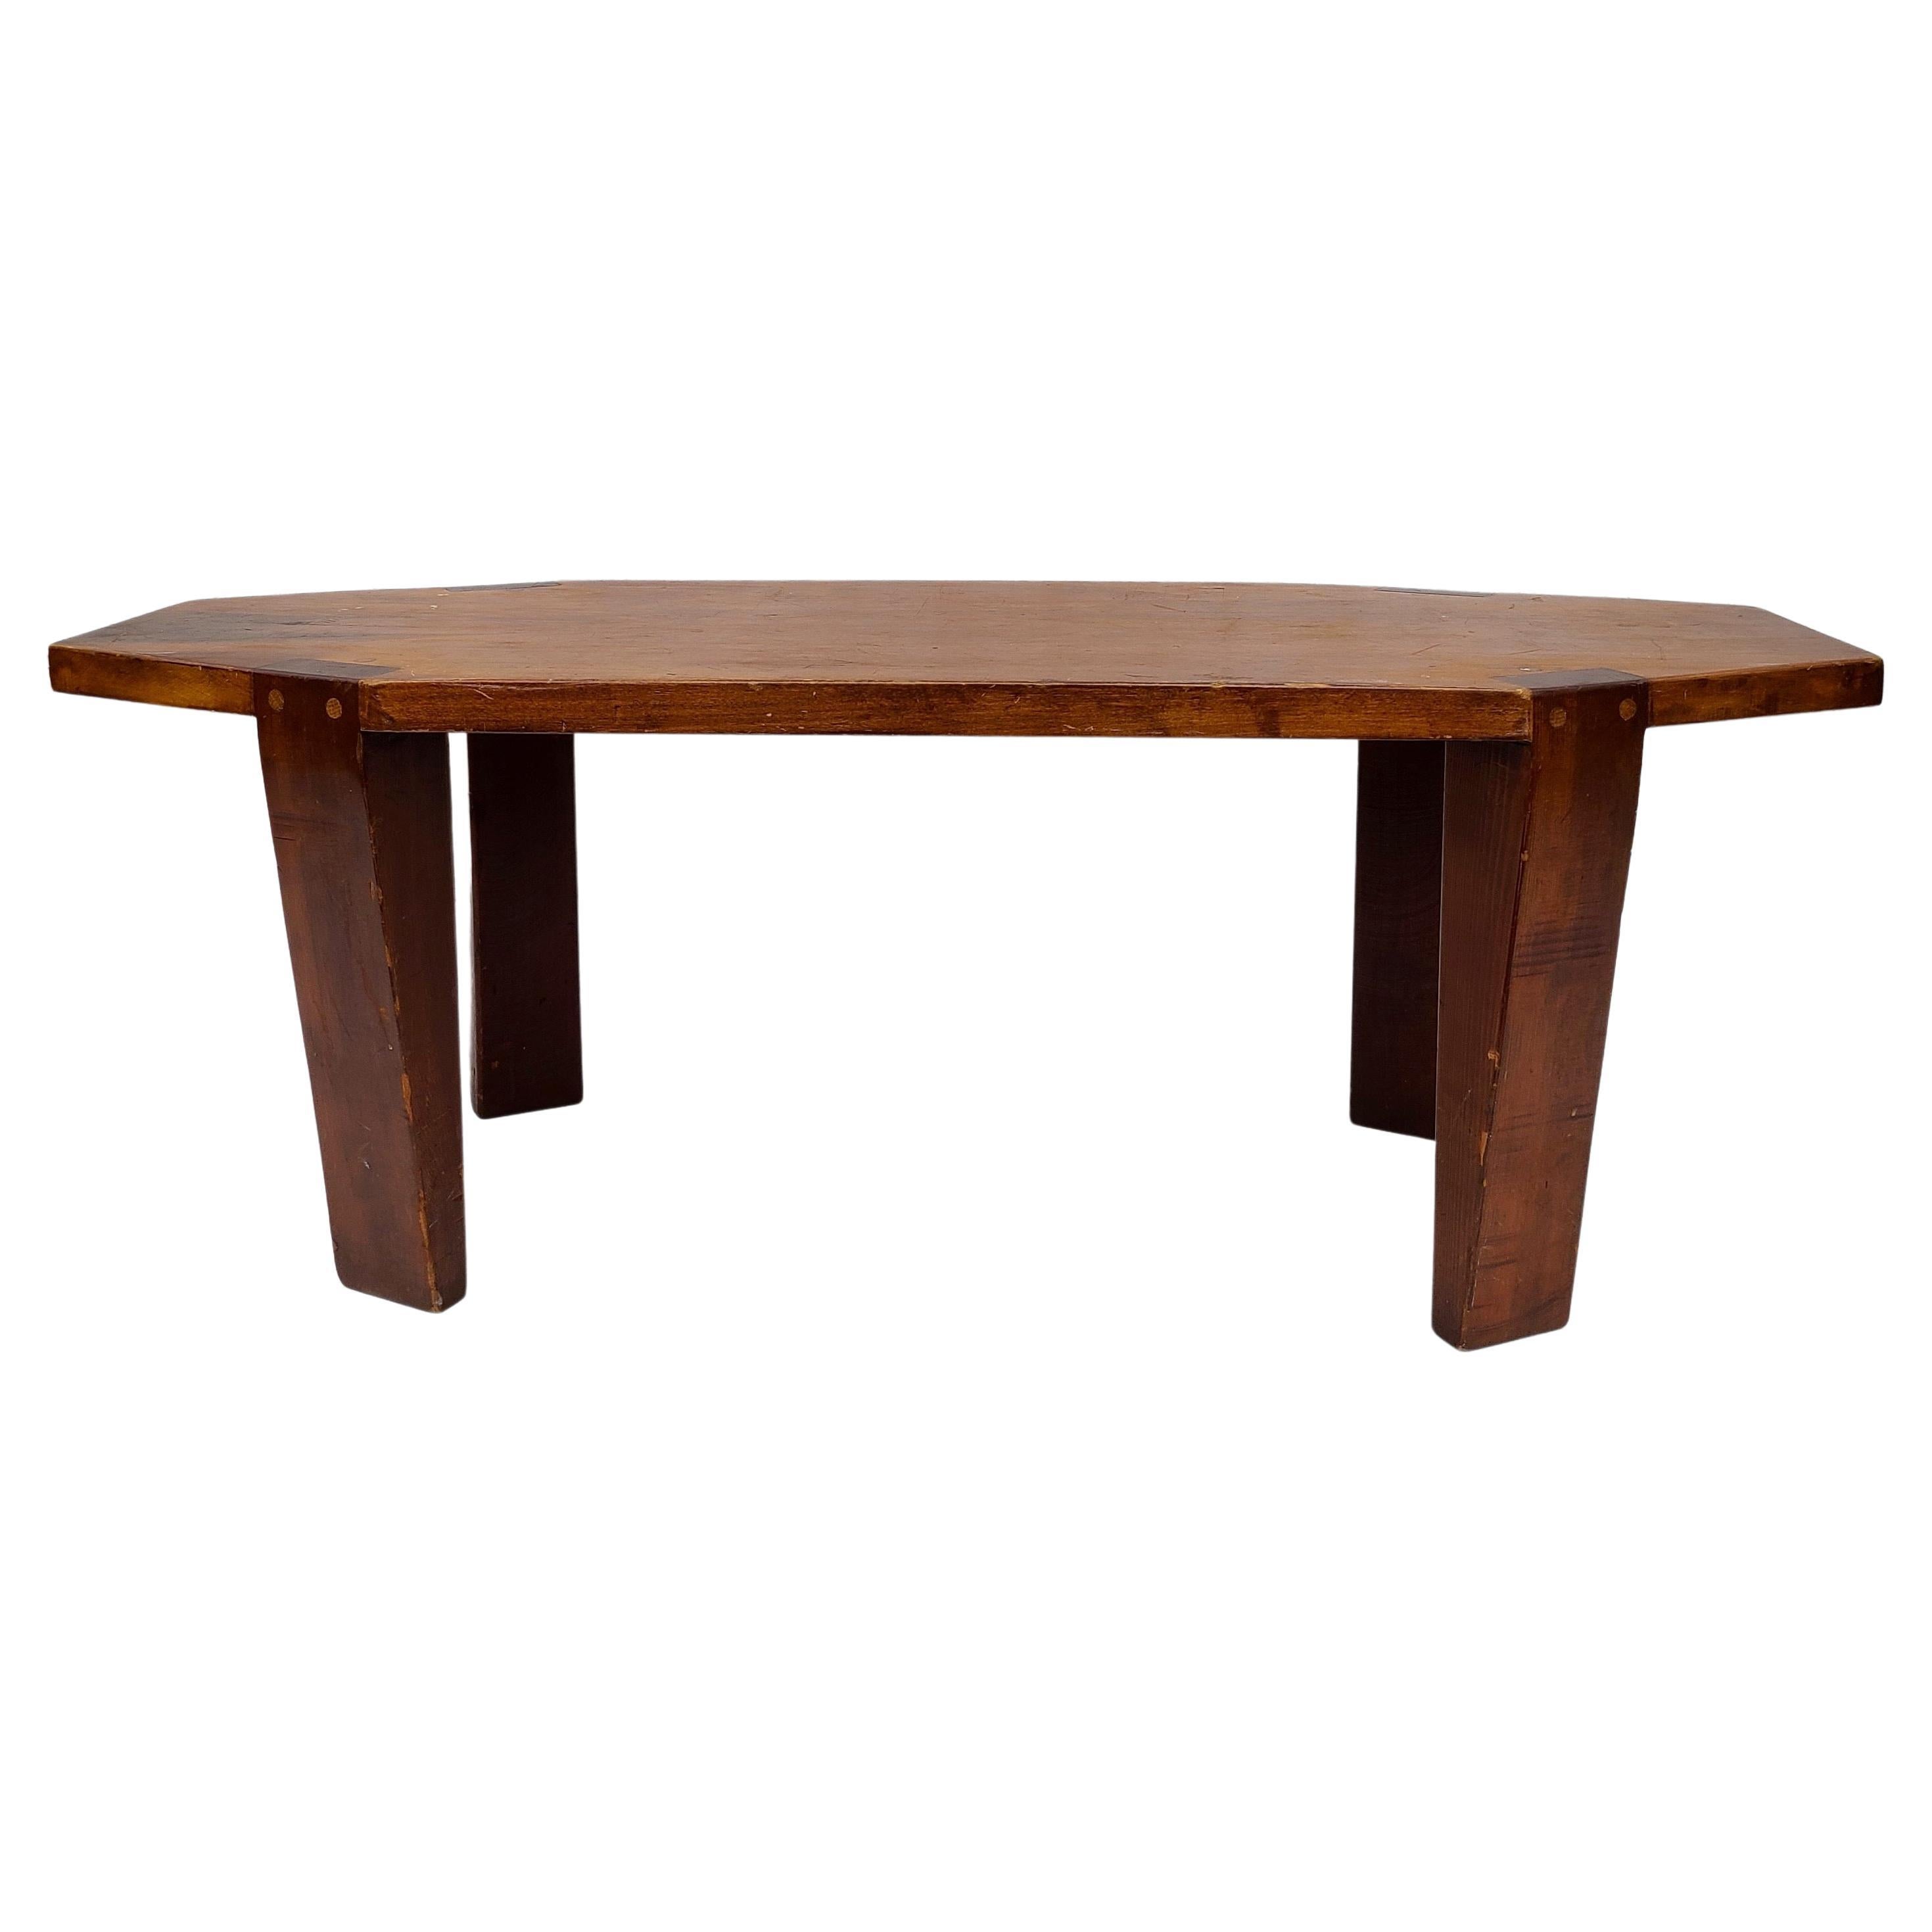 Please message us for a cost effective shipping quote to your location.

Studiocraft coffee table. Appears to be maple top with fir legs. Geometric design fuses interesting angels with simple proportions reminiscent of Charlotte Perriand. Made be an